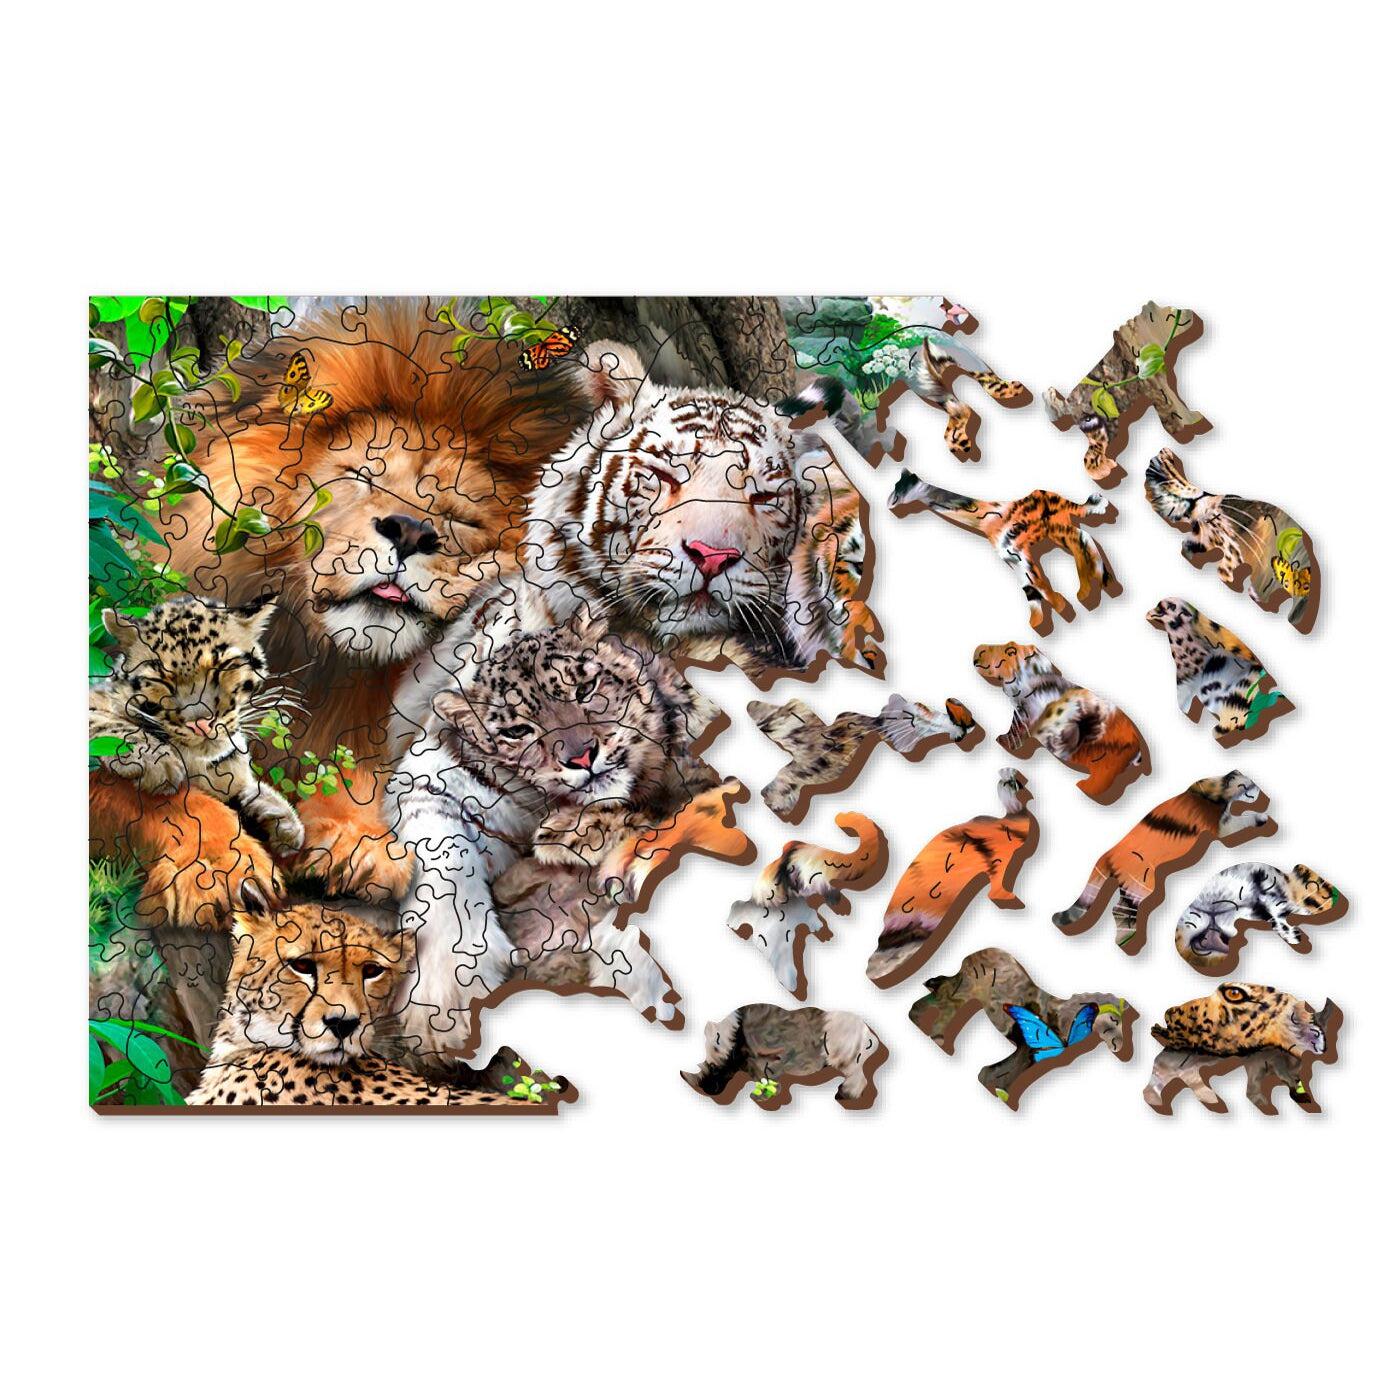 Nap Time 300 Piece Wood Jigsaw Puzzle Wooden City